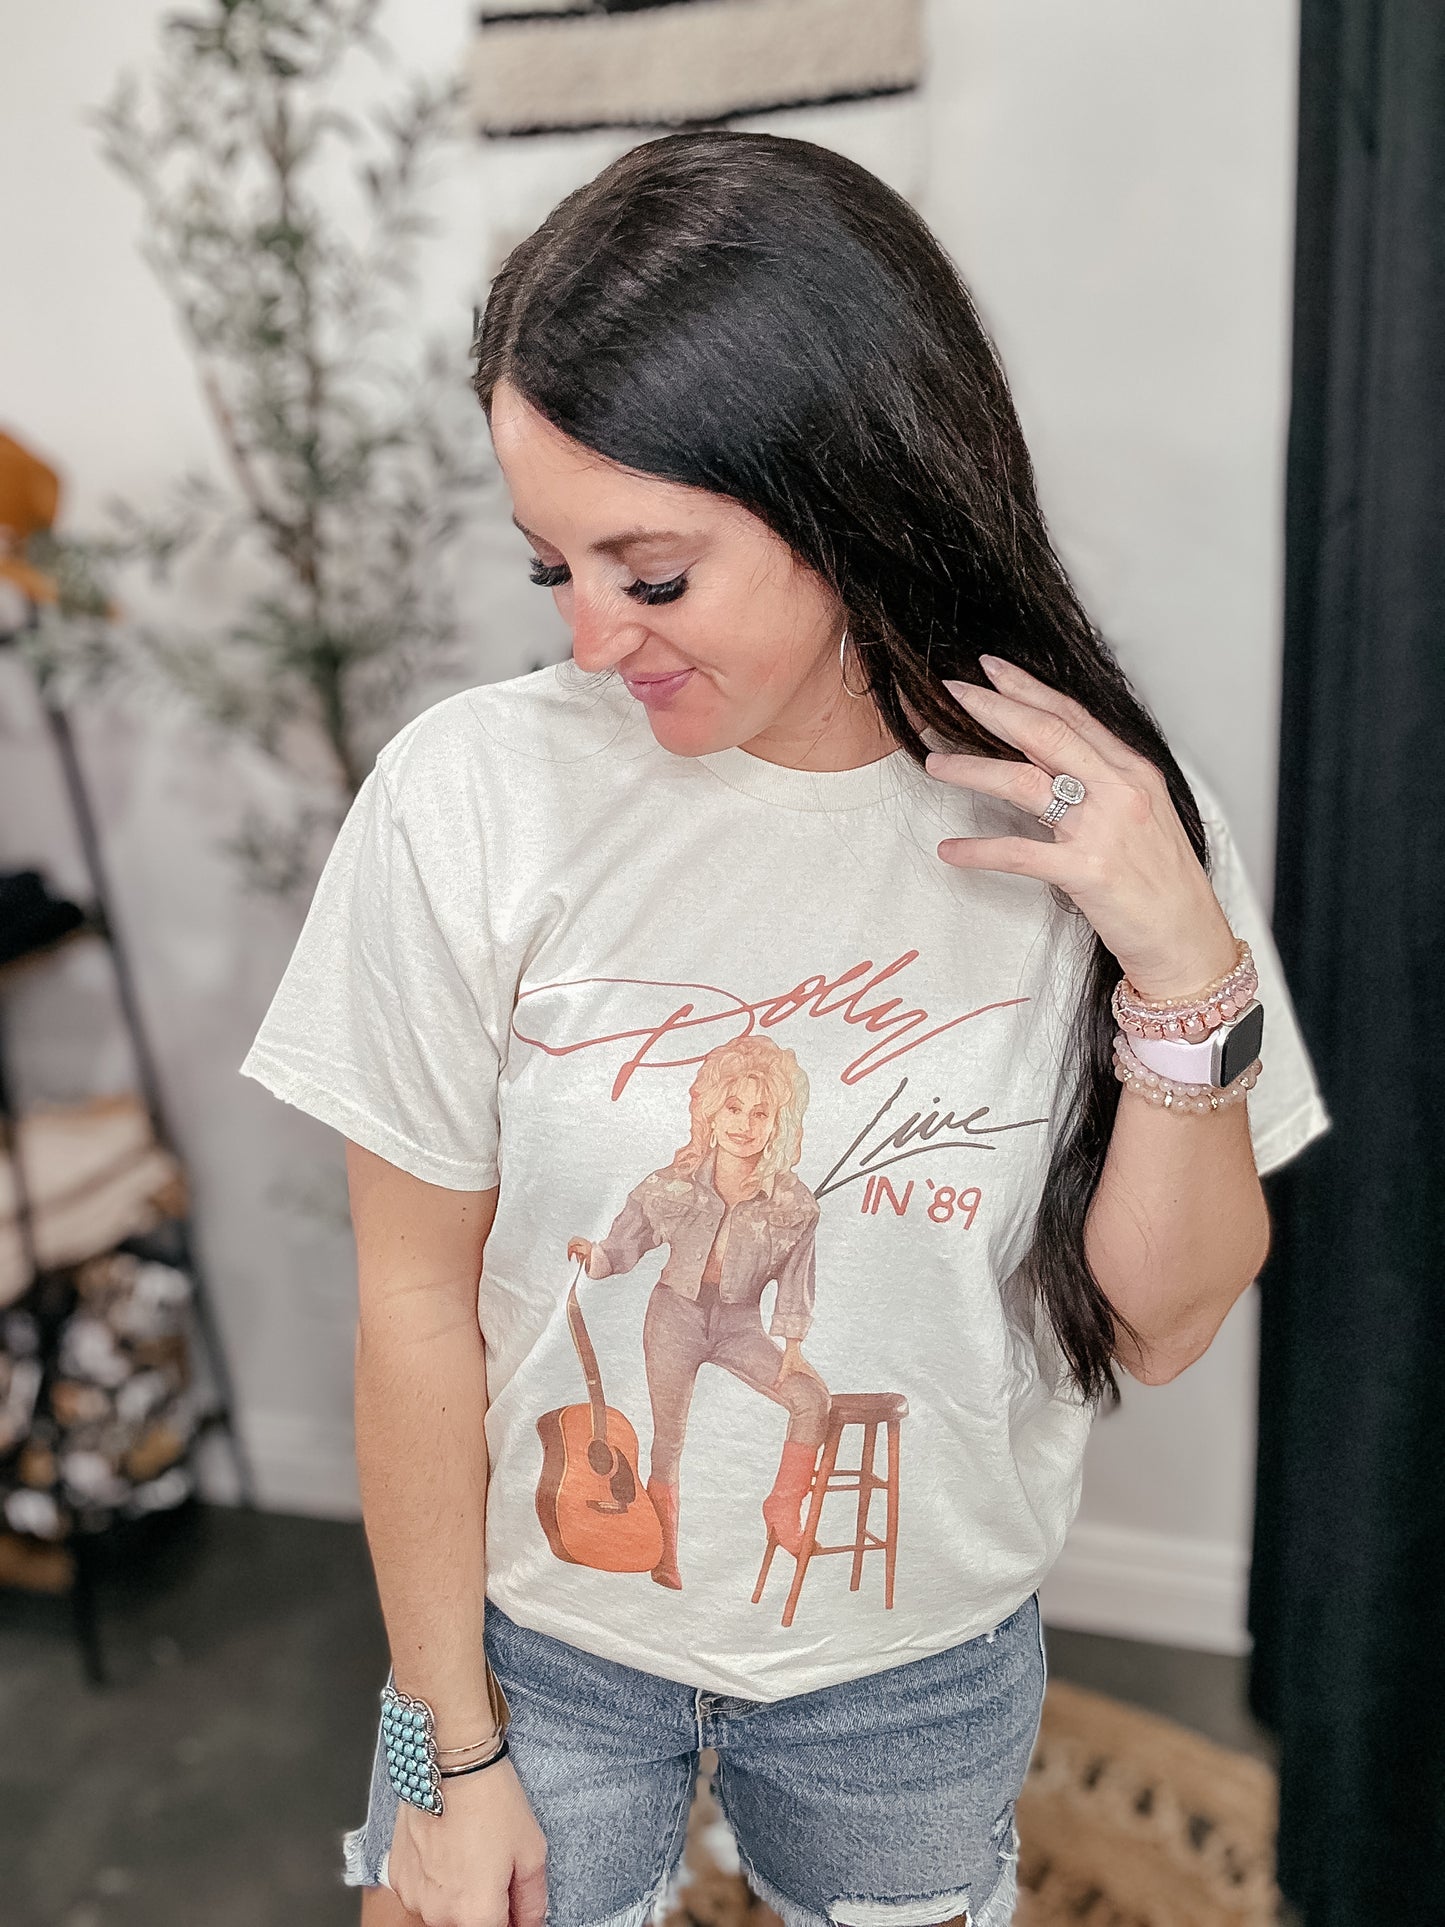 Dolly Parton Live in '89 Thrifted Graphic Tee